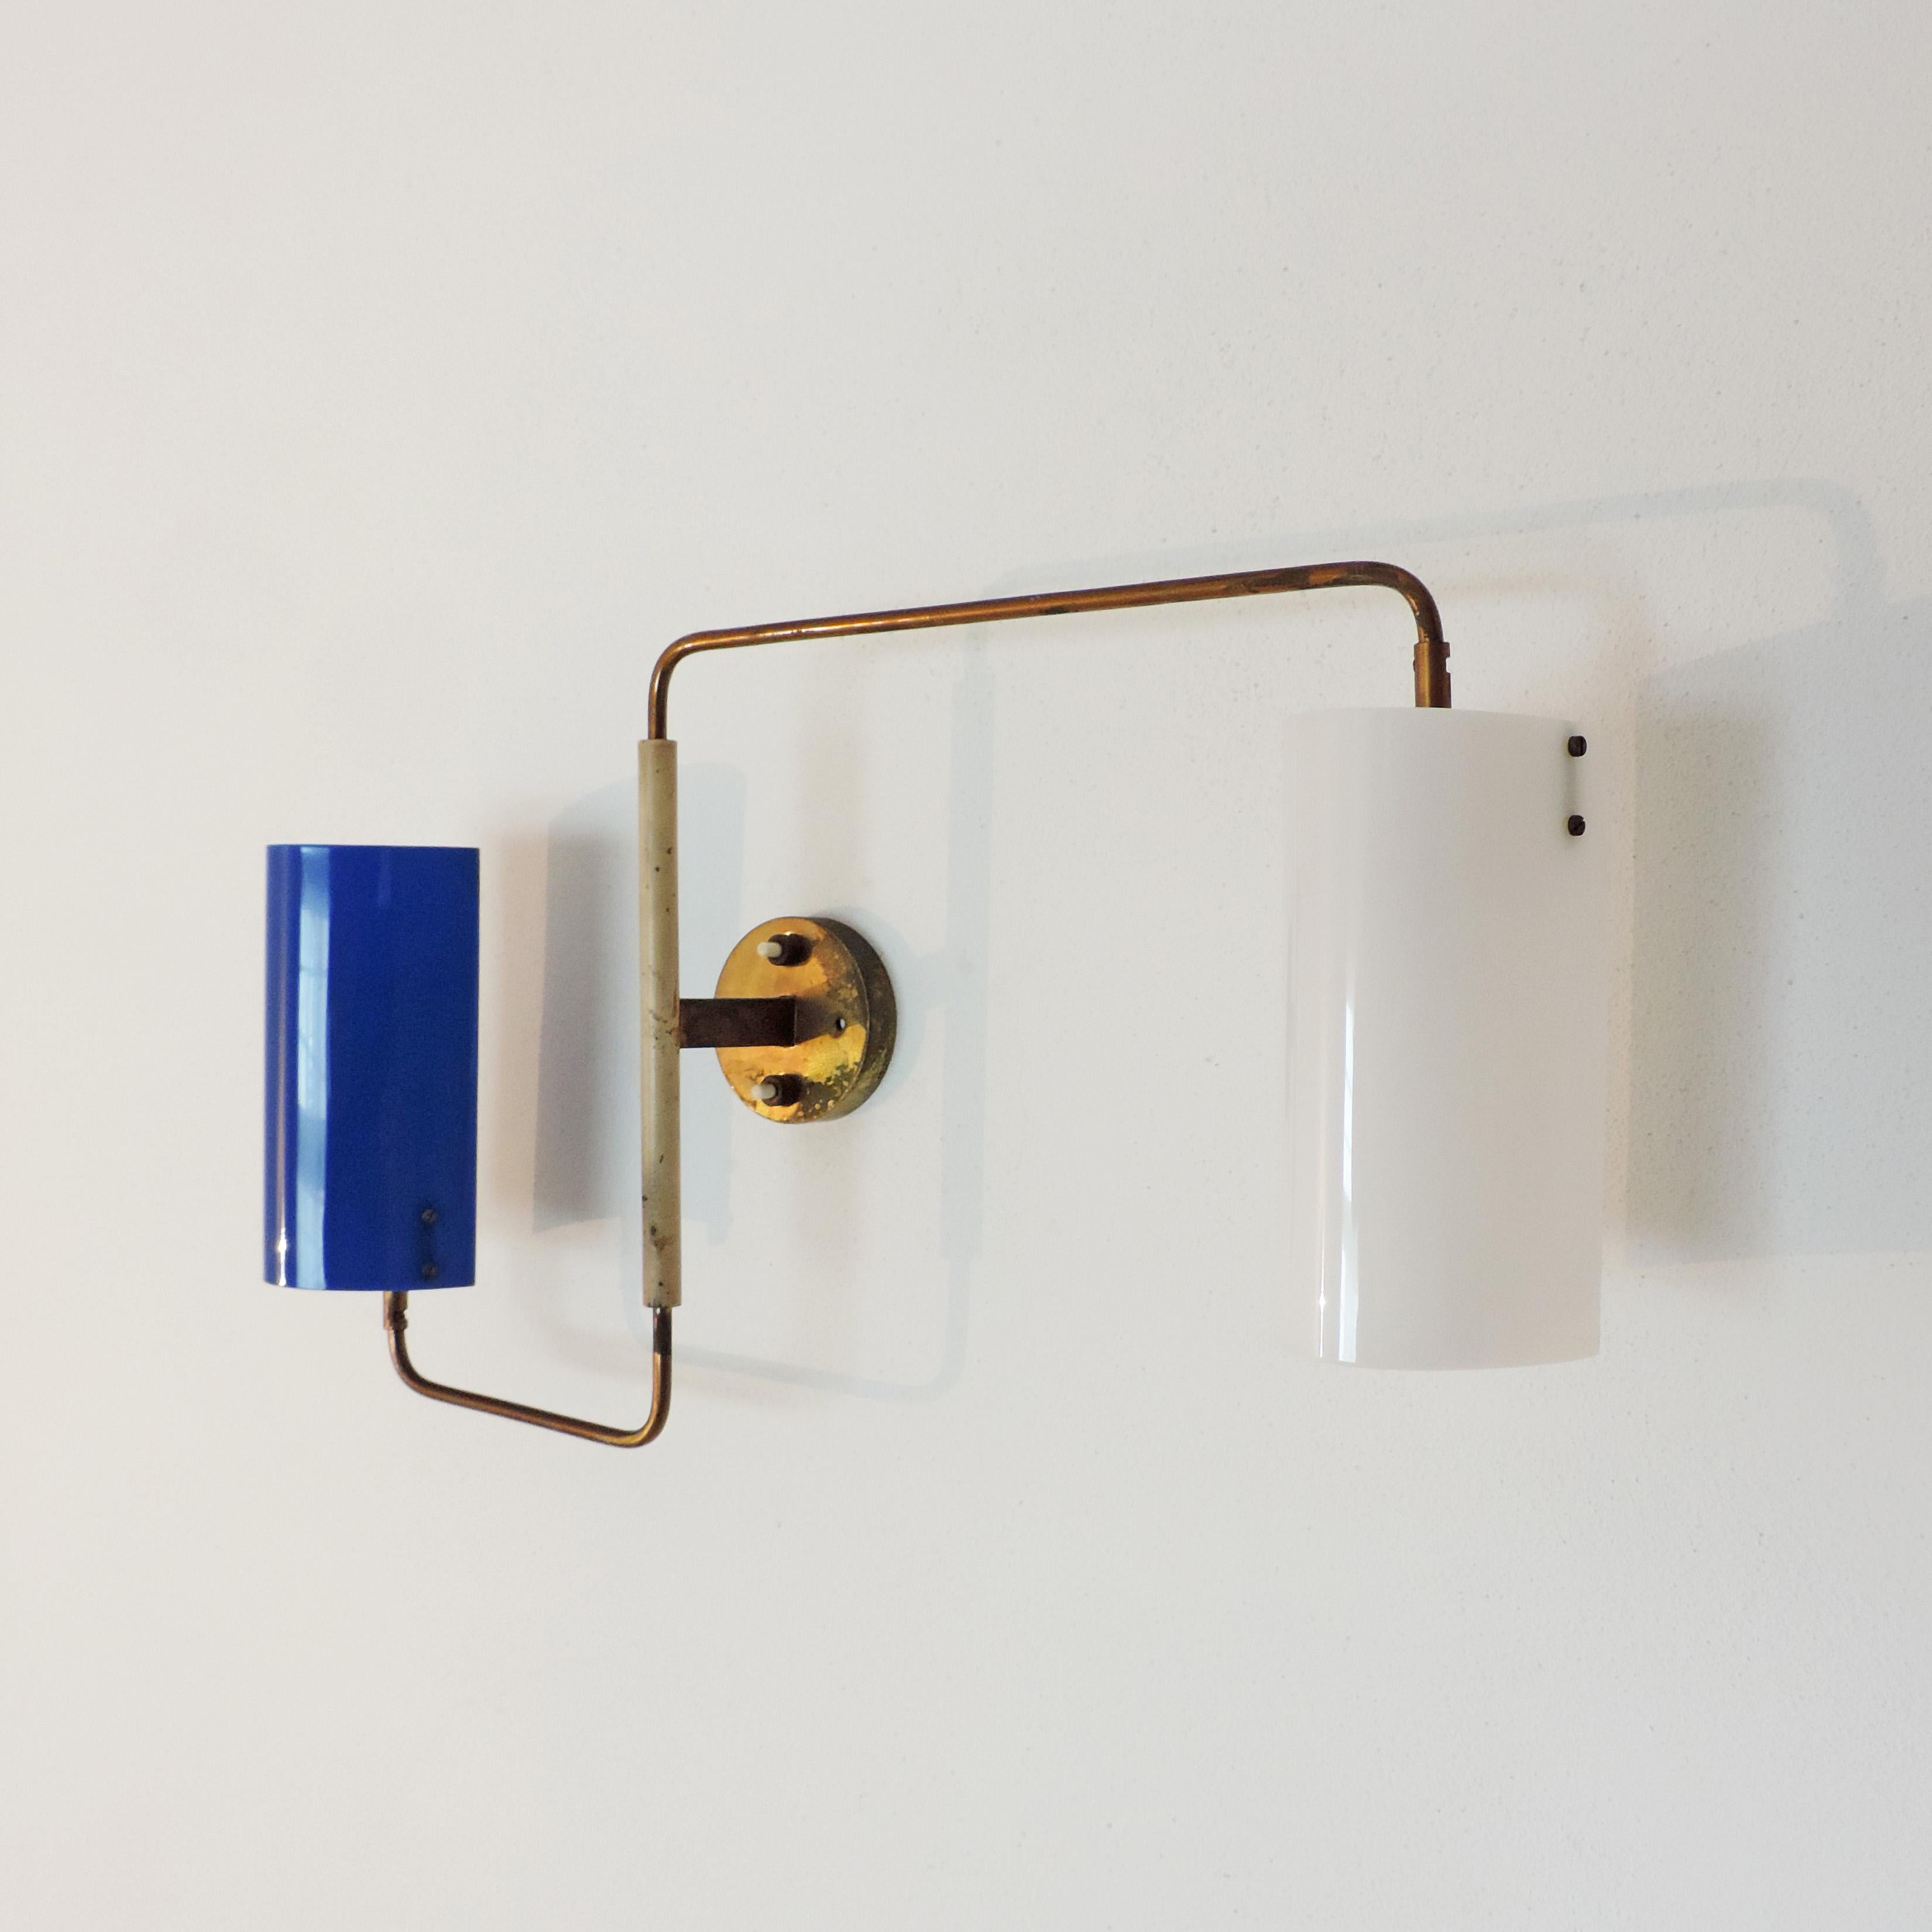 Mid-20th Century Tito Agnoli Adjustable Wall Lamp in Brass and Plexiglas for Oluce, Italy, 1950s